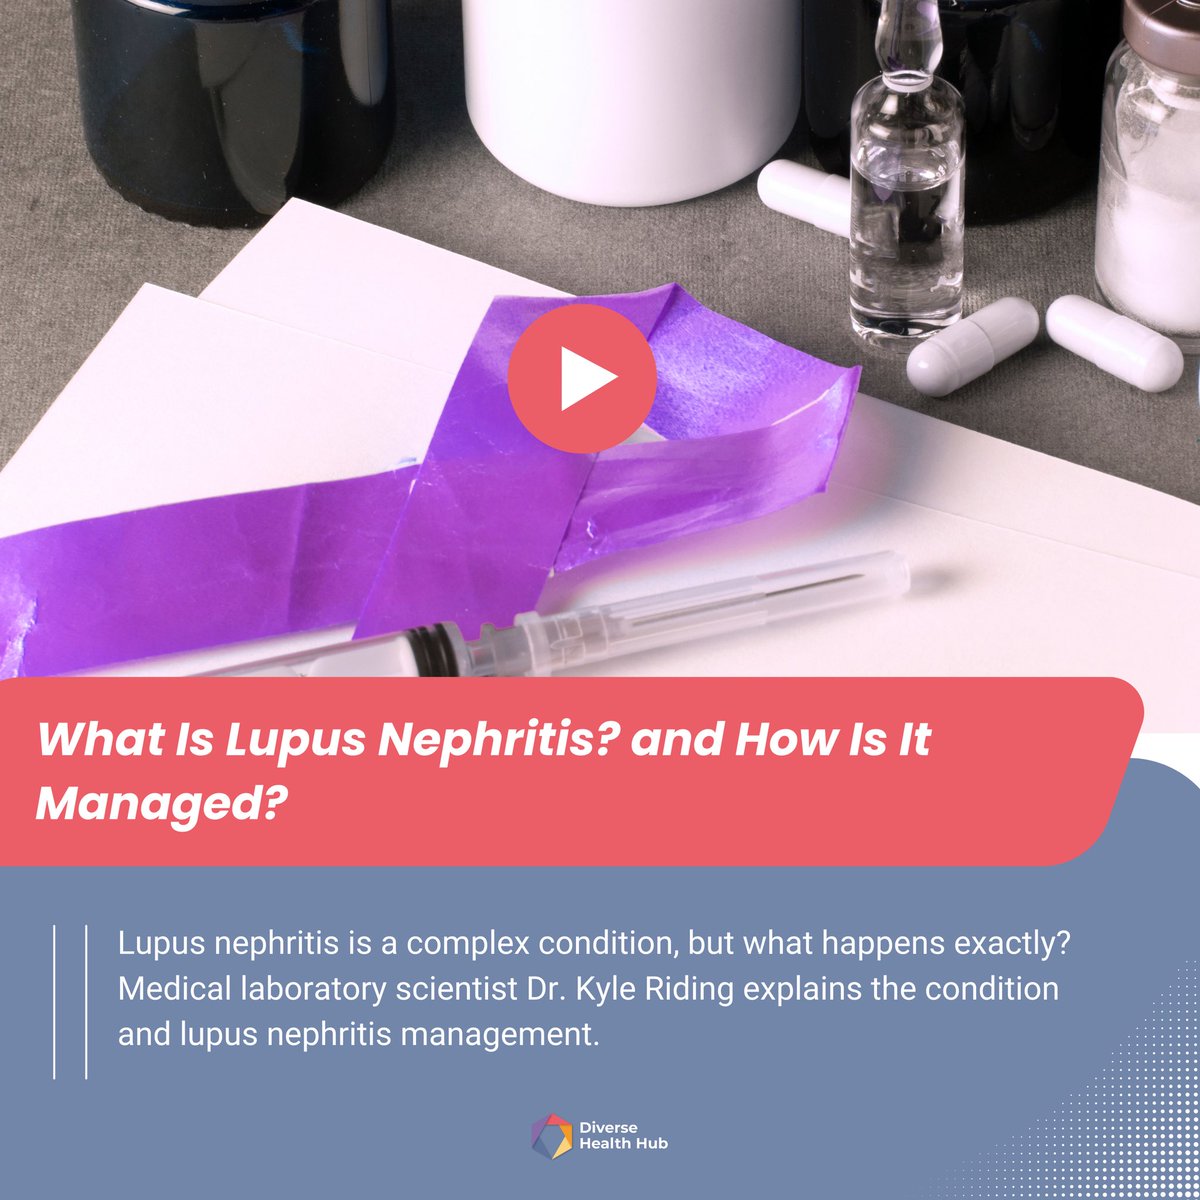 🎥 Our #DiagnosticsDecoded video is live! Do you have under 3 minutes to learn about #LupusNephritis? Medical laboratory scientist Dr. Kyle Riding @KRidingMLS decodes #SLE, the importance of kidney function and shares actionable advice for patients. Watch: bit.ly/4ckPahz